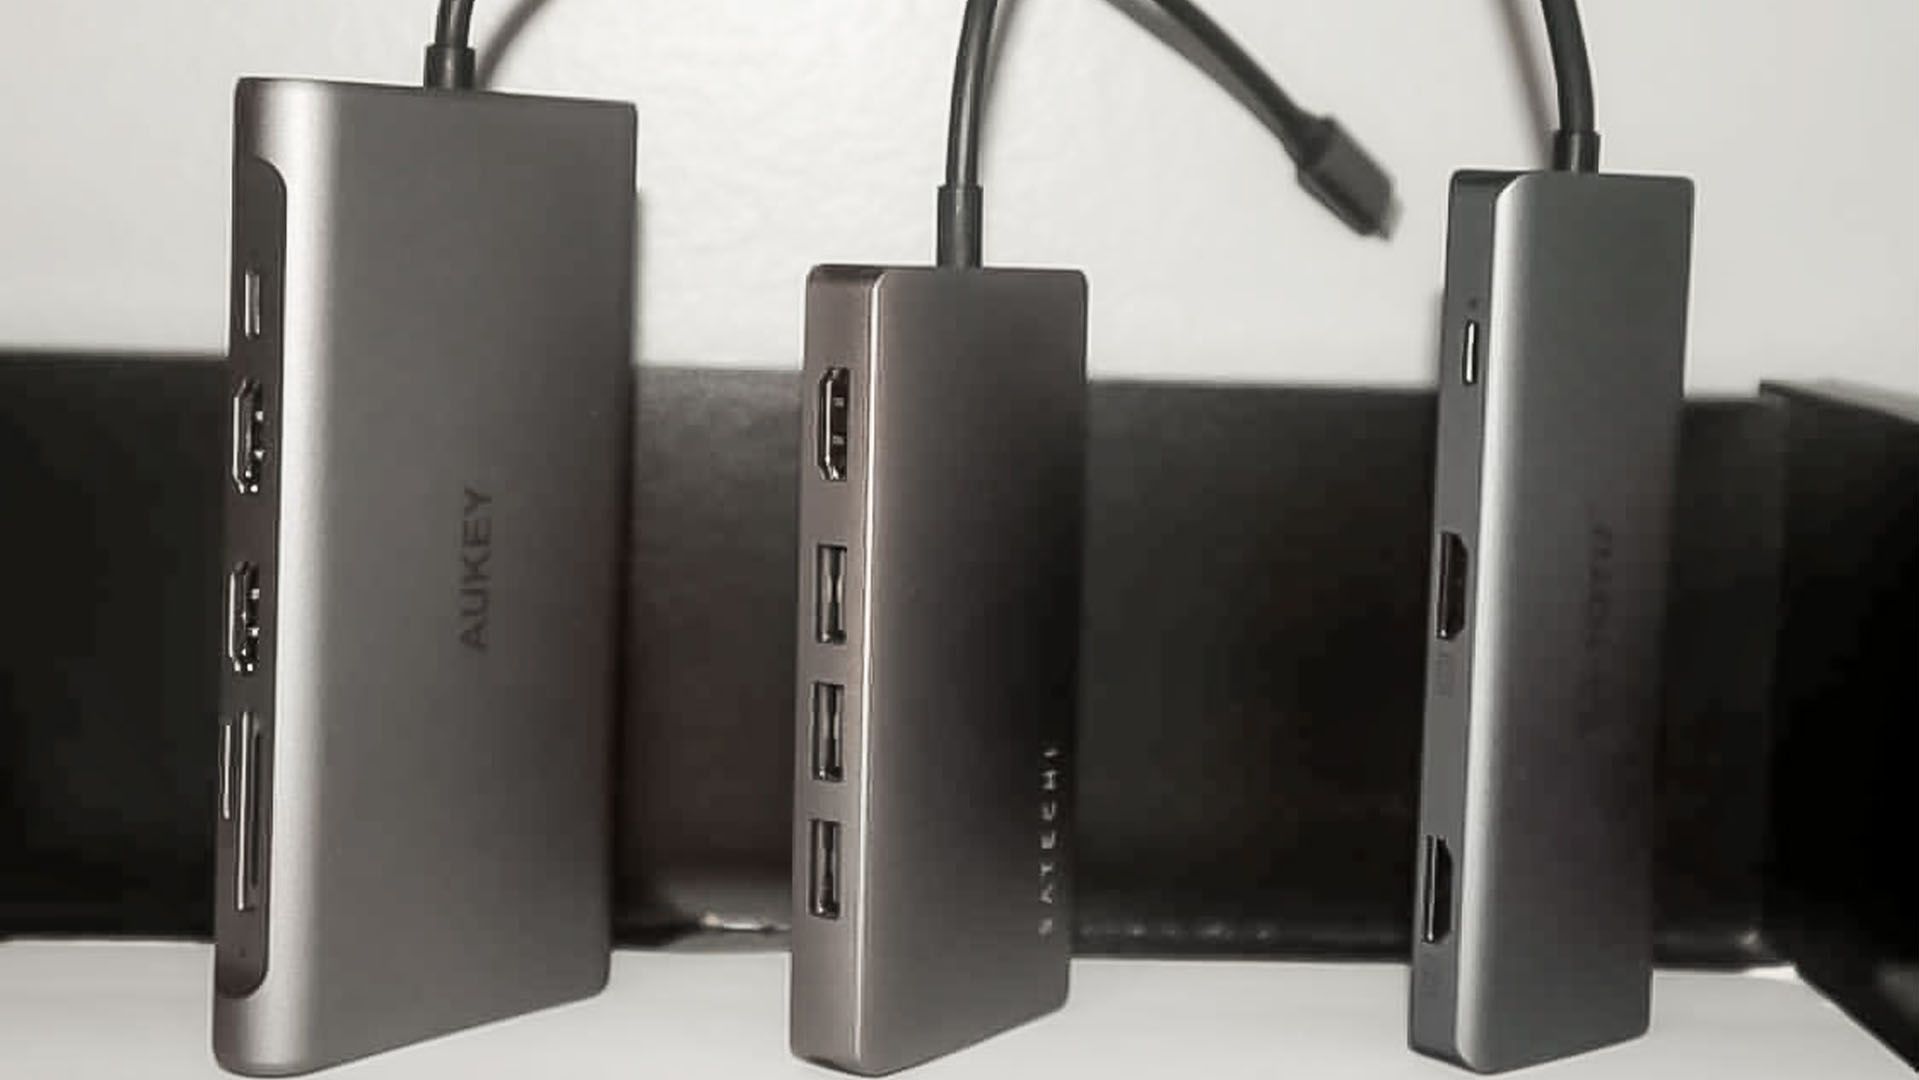 The best USB-C hub deals in February 2024